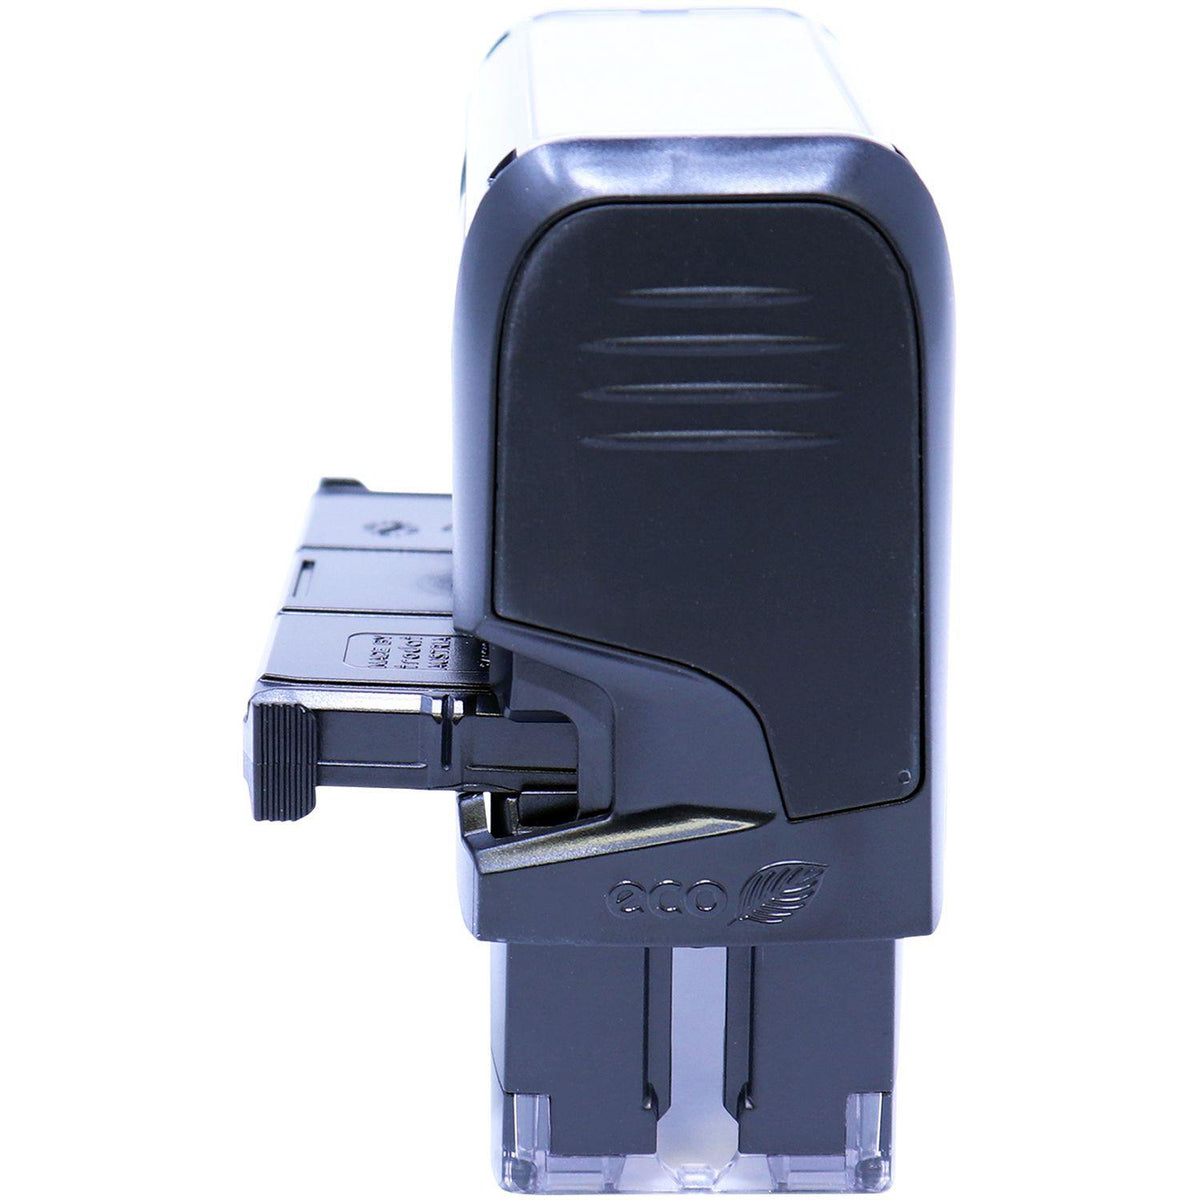 Self Inking Urgent Stamp - Engineer Seal Stamps - Brand_Trodat, Impression Size_Small, Stamp Type_Self-Inking Stamp, Type of Use_Postal &amp; Mailing, Type of Use_Shipping &amp; Receiving